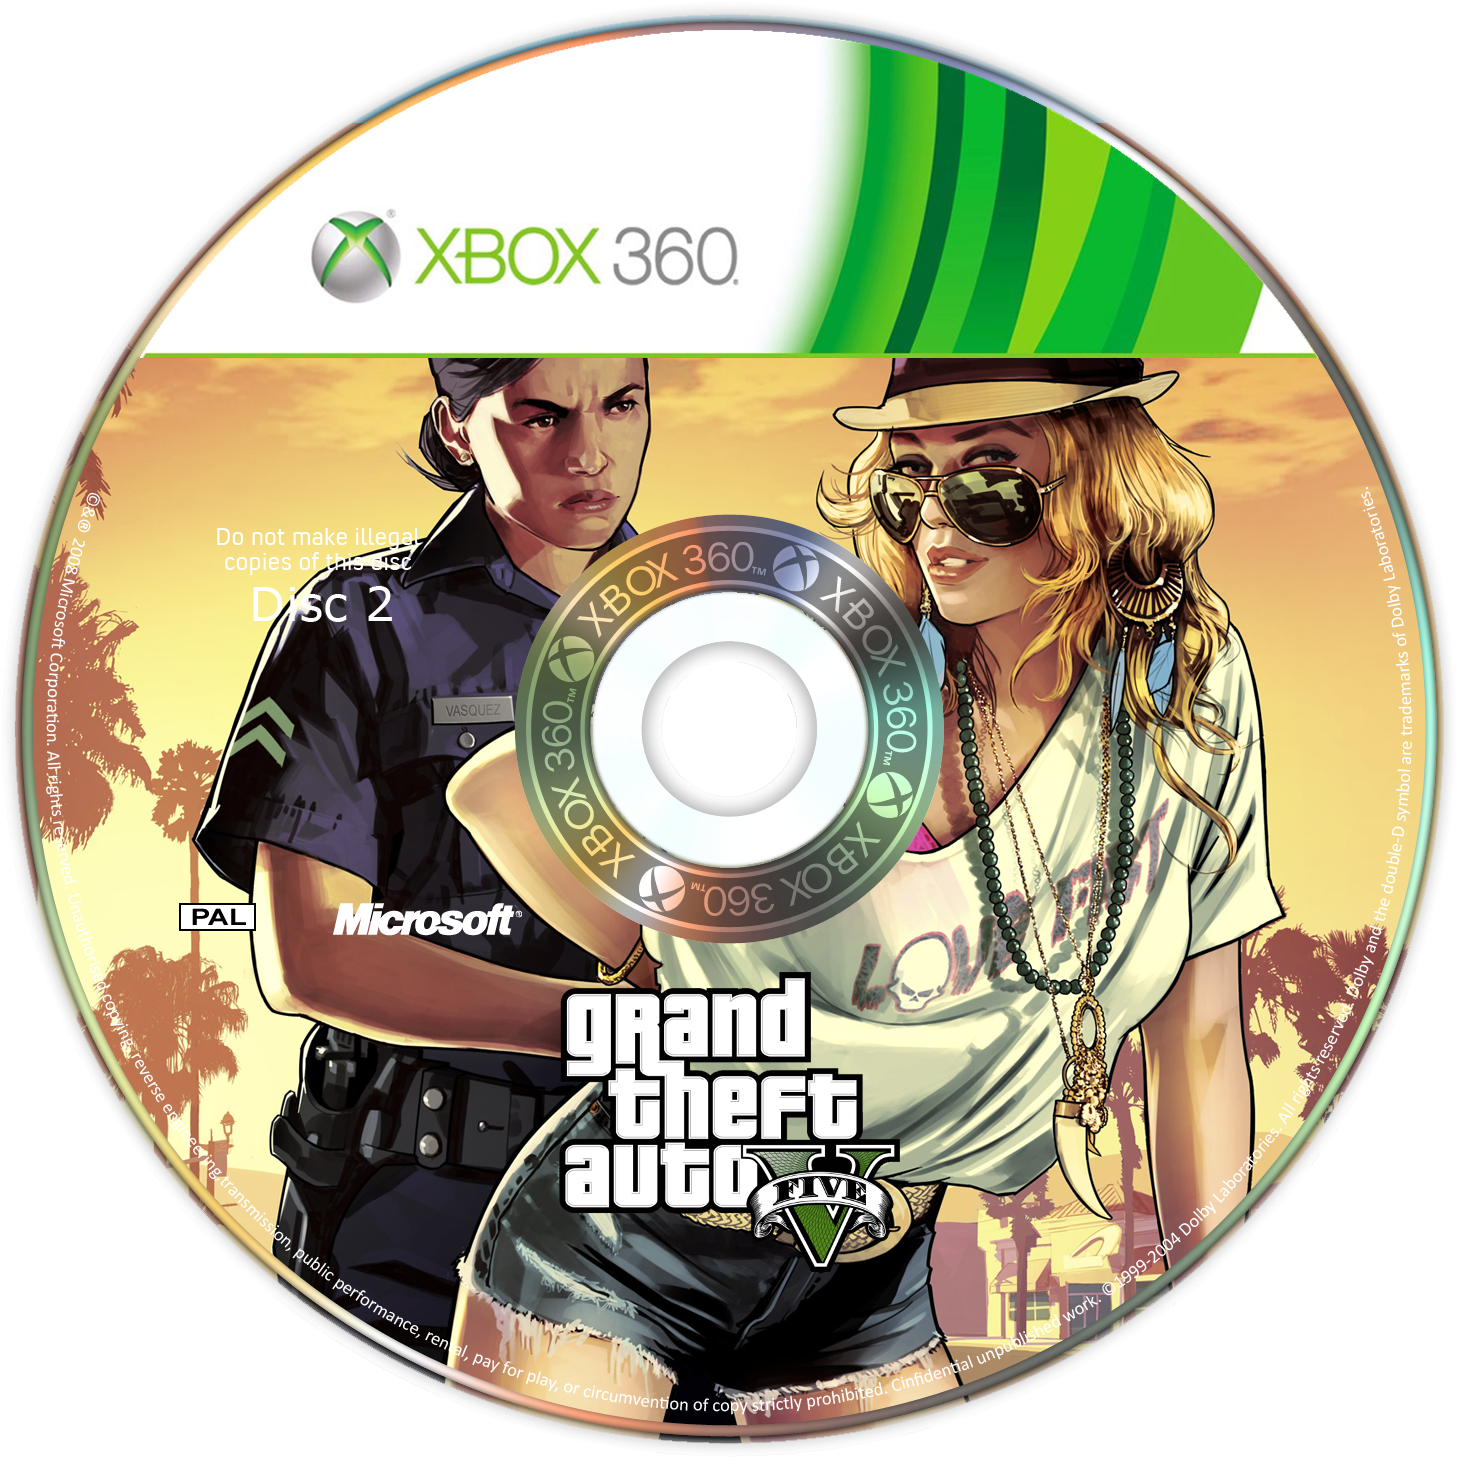 Viewing full size GTA V Disc 2 box cover